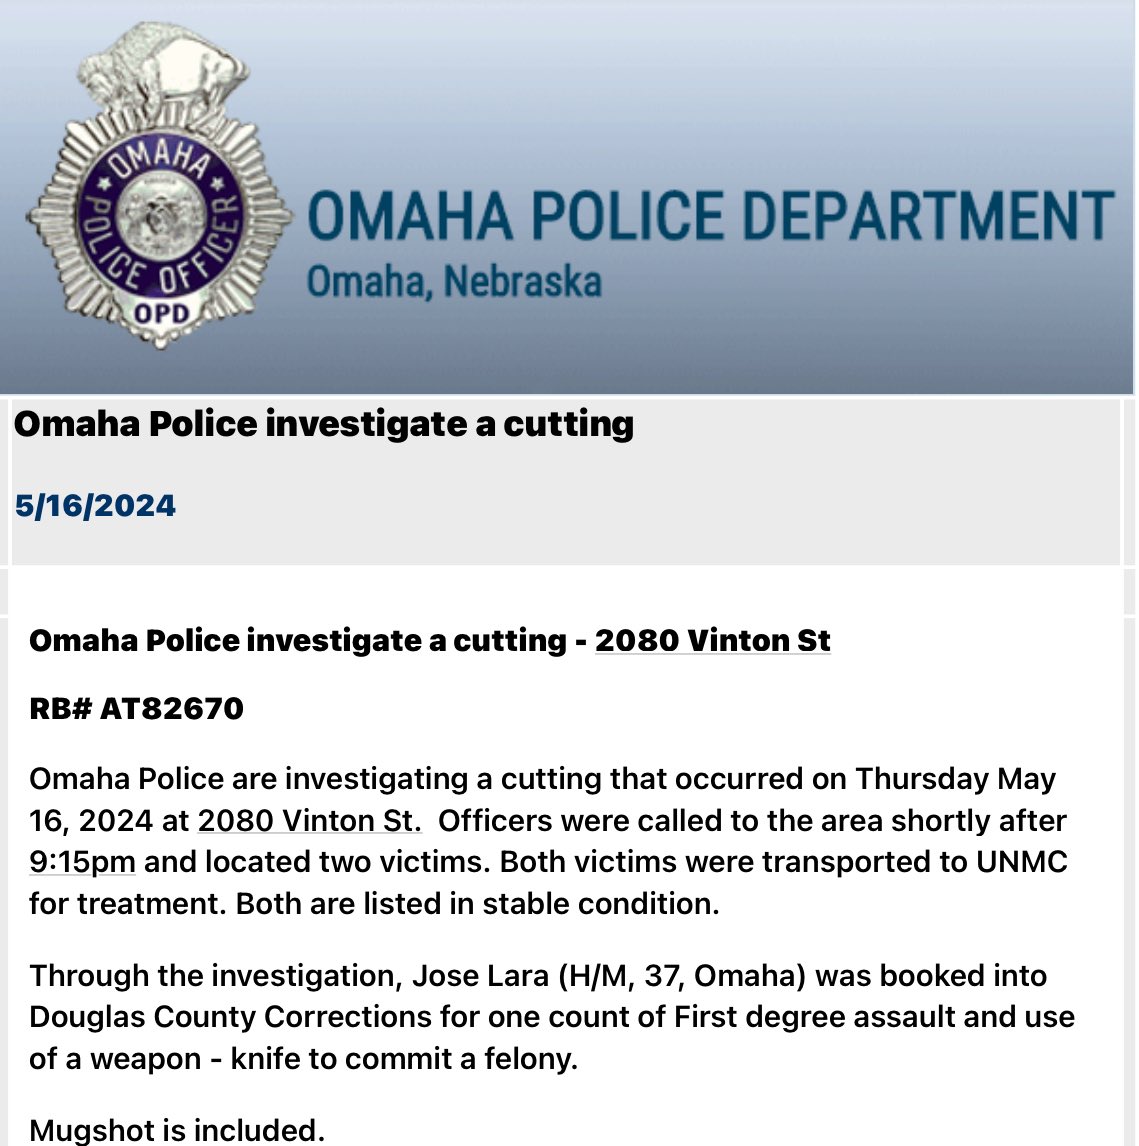 Omaha Police arrested Jose Lara after officers were called to a cutting at 2080 Vinton Street. Two victims were transported to the hospital. Lara was booked for first degree assault and use of a weapon to commit a felony